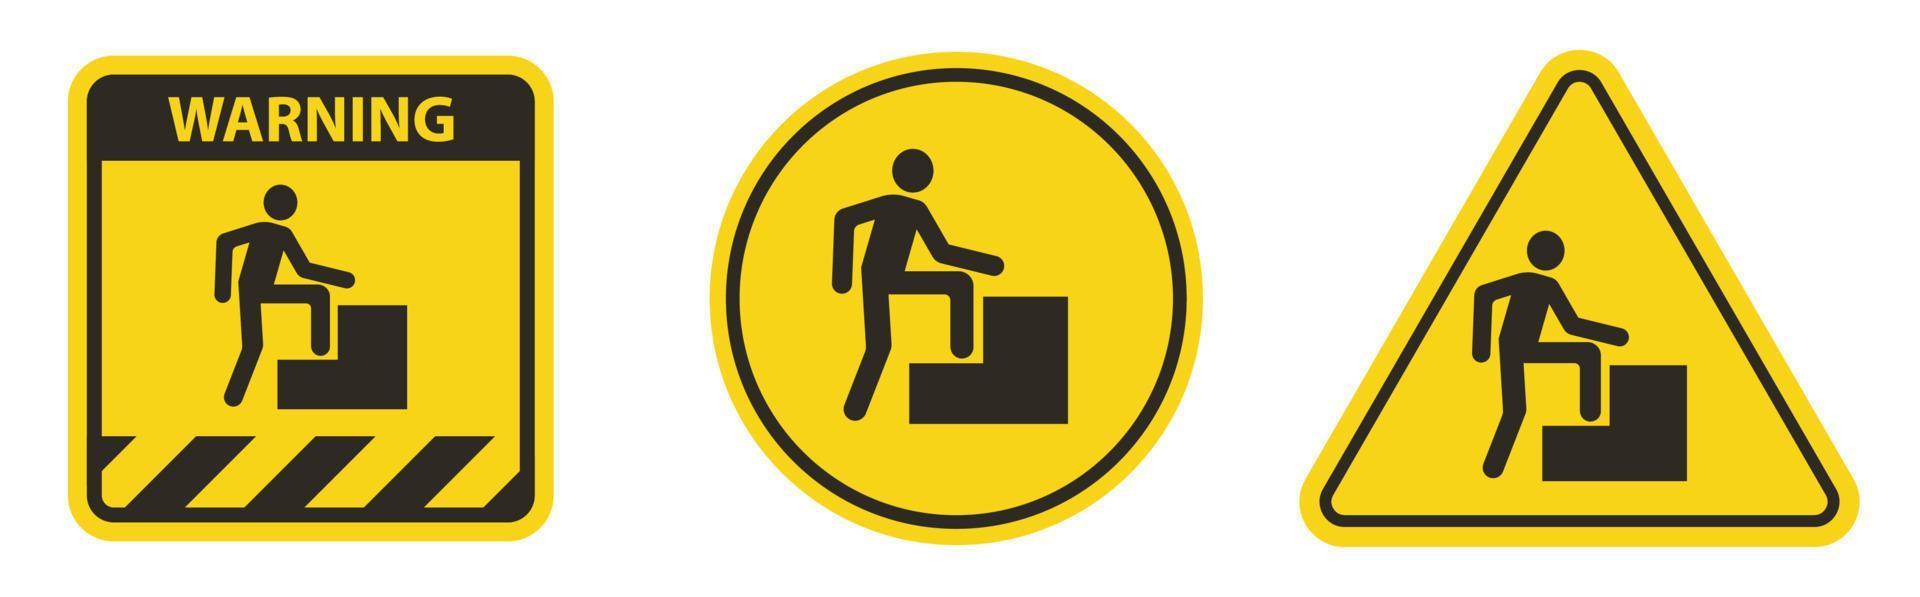 Caution Step Up Sign On White Background vector